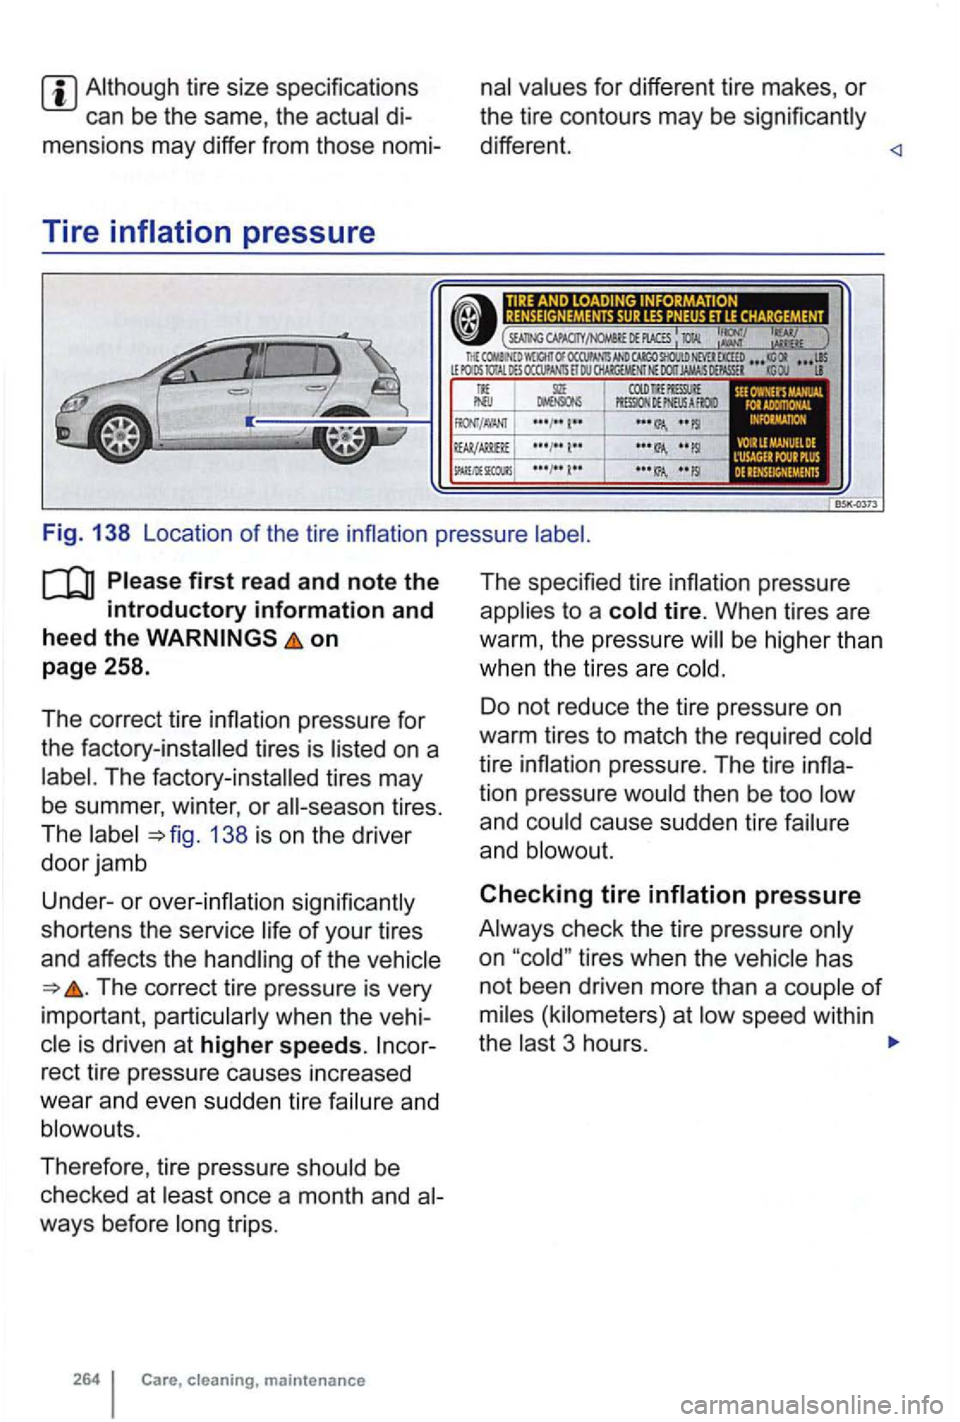 VOLKSWAGEN GOLF 2009 Owners Manual di­
mensions  may differ  from those  nomi-
Tire 
for different  tire makes, or 
the tire contours  may be 
different. 
on 
page  258. 
The  correct  tire inflation  pressure  for 
the  factory-insta